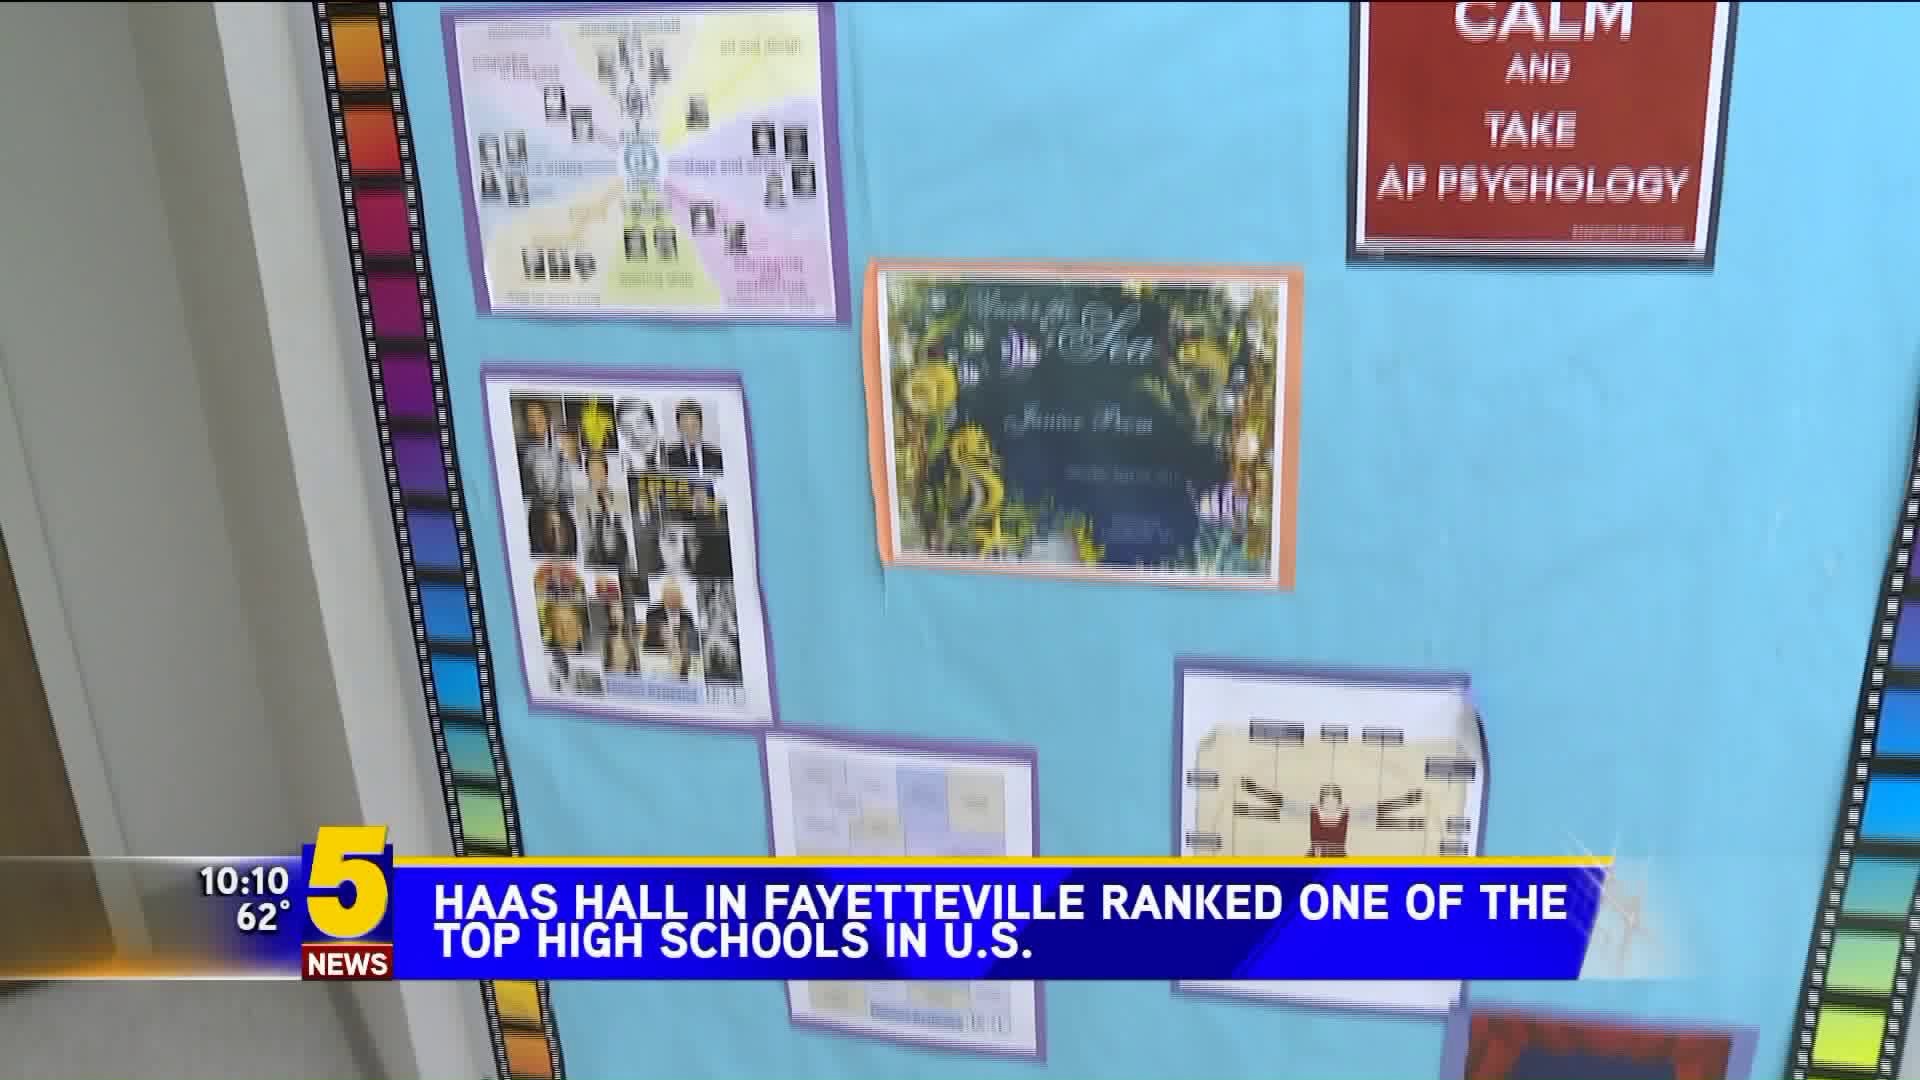 Haas Hall in Fayetteville Ranked One of Top High Schools in US